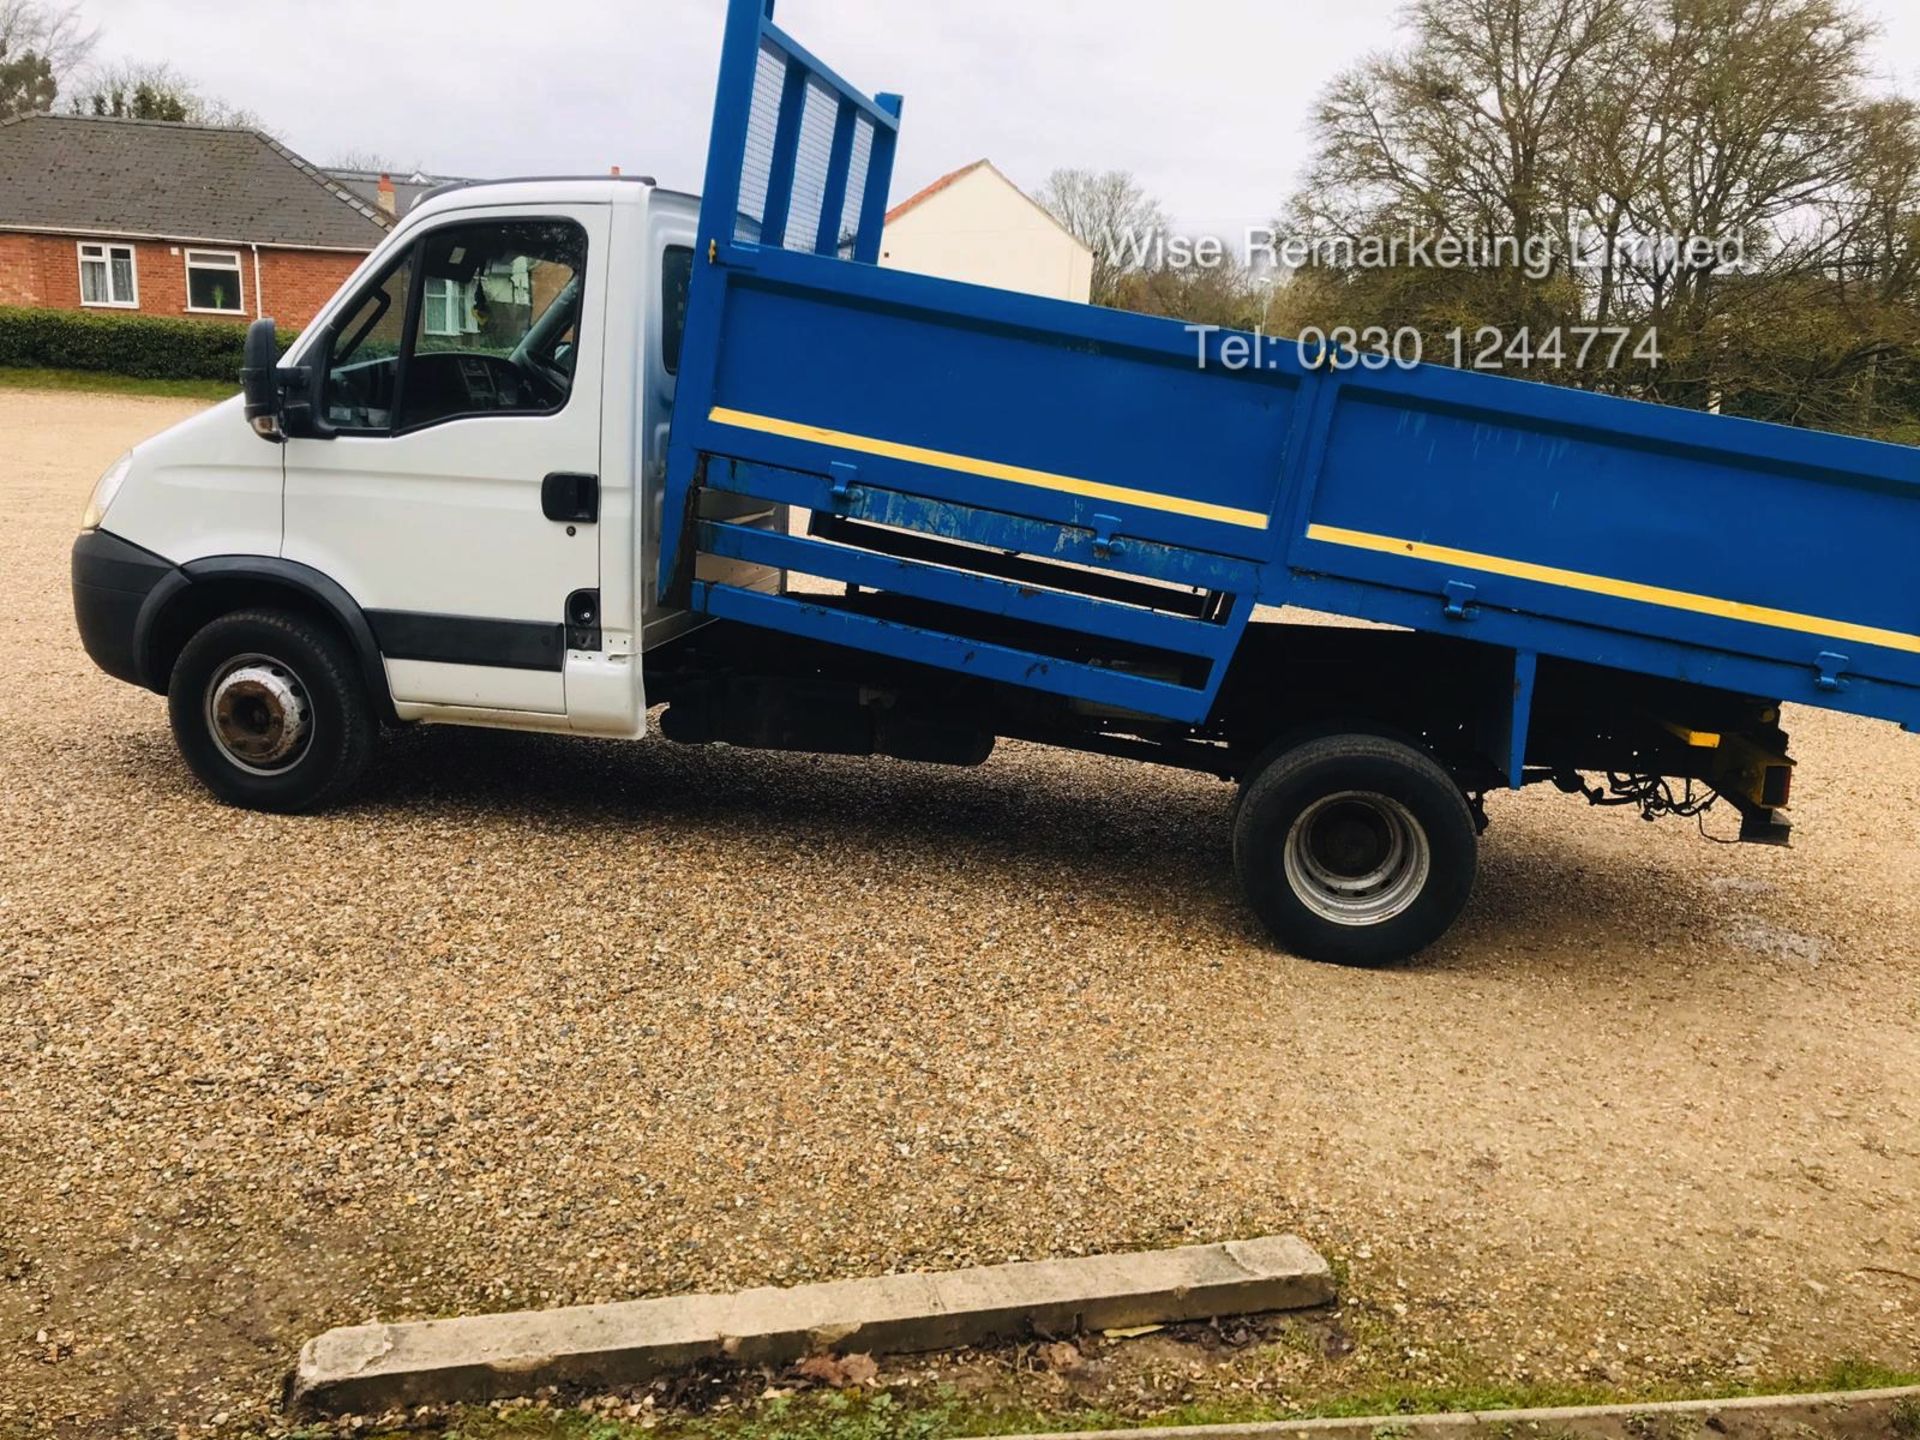 Iveco Daily 3.0 TD 60C18 Tipper (Twin Wheeler) - 6 Speed - 2011 Model - 1 Keeper SAVE 20% NO VAT - Image 6 of 18